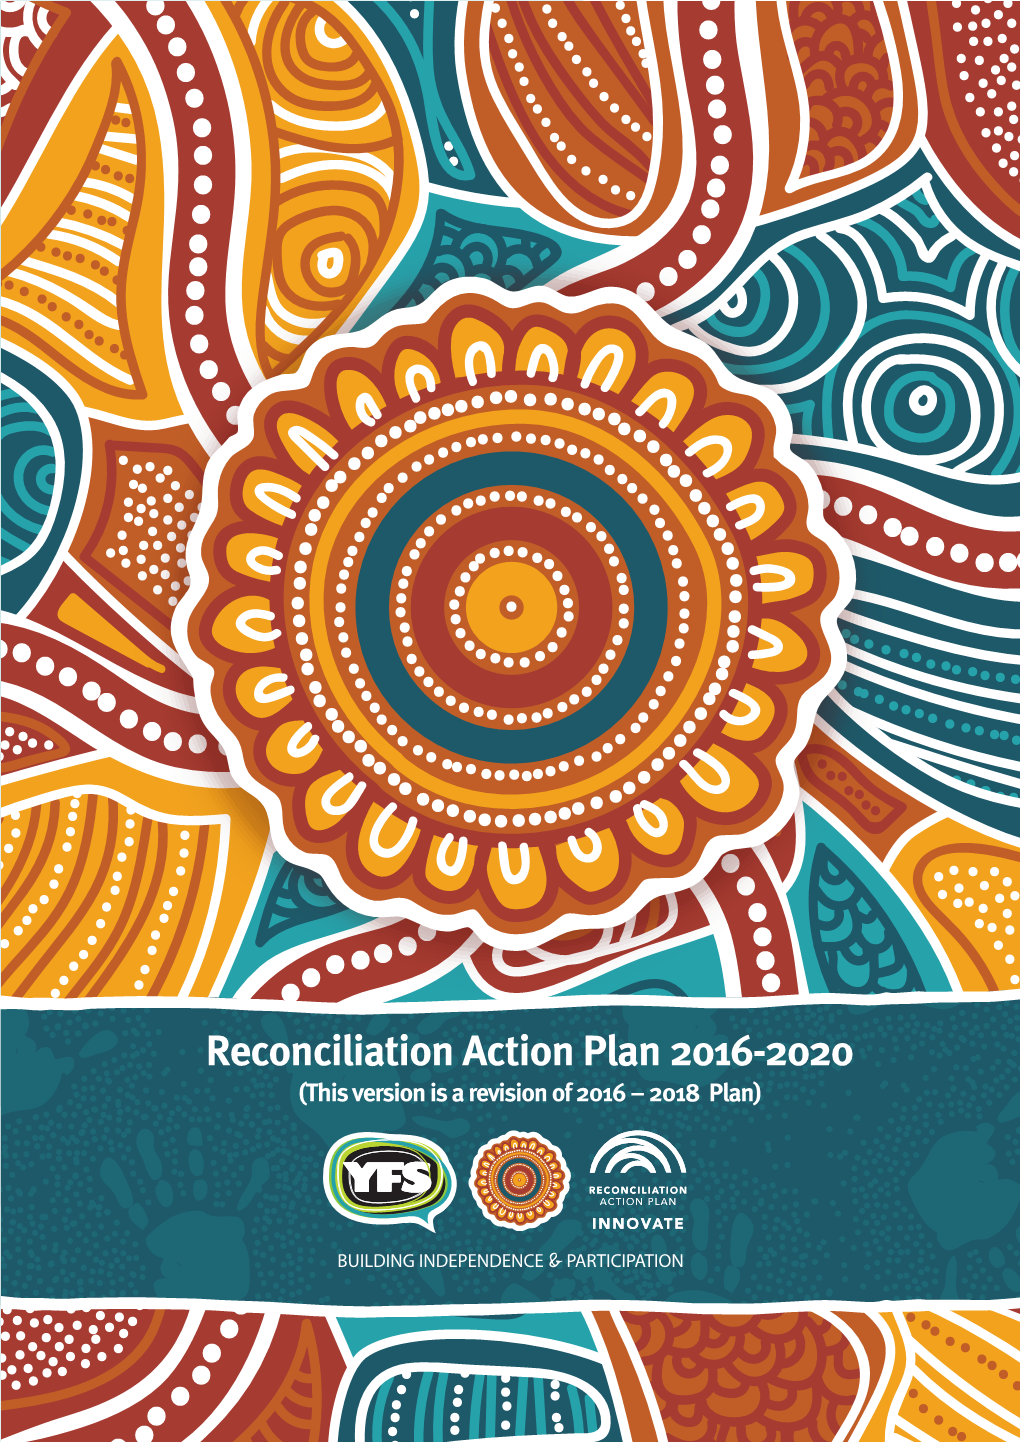 Reconciliation Action Plan 2016-2020 (This Version Is a Revision of 2016 – 2018 Plan)